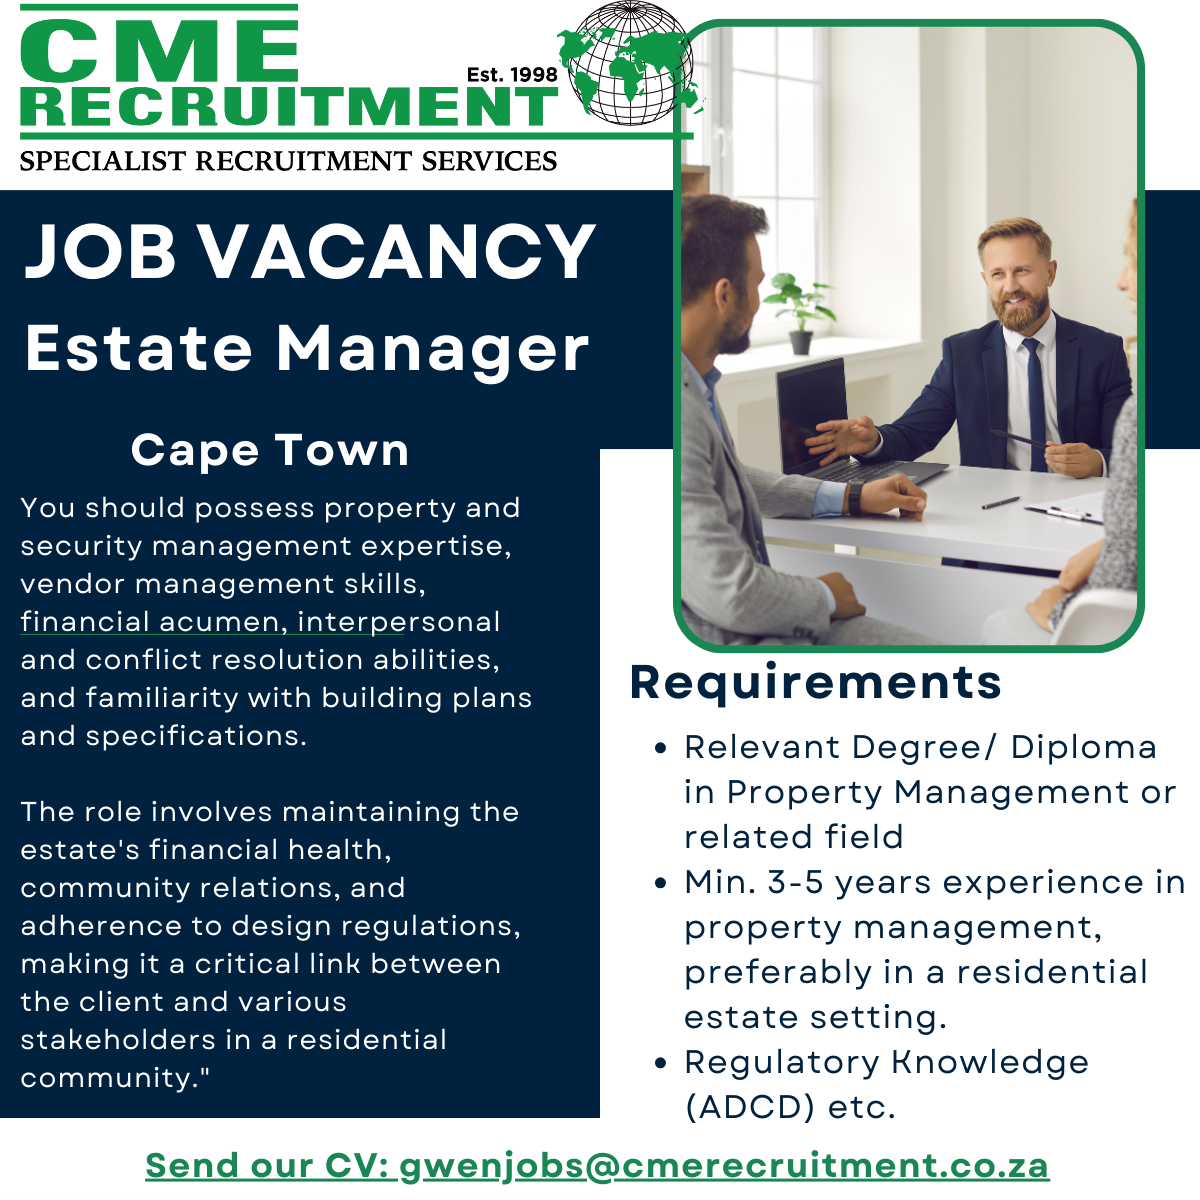 Est I
RECRUITMENT.

SPECIALIST RECRUITMENT SERVICES

JOB VACANCY
Estate Manager

Cape Town

You should possess property and
security management expertise,
vendor management skills,
financial acumen, interpersonal
and conflict resolution abilities,

and familiarity with building plans Requirements

and specifications.

  

* Relevant Degree/ Diploma
i
The role involves maintaining the n Property Management or

ERC CR RIL EEN CER related field
community relations, and e Min. 3-5 years experience in

adherence to design regulations, property management,

making it a critical link between preferably in a residential

the client BNE] VEIT estate setting.

stakeholders in a residential

La * Regulatory Knowledge
(ADCD) etc.

Send our CV: gwenjobs@cmerecruitment.co.za